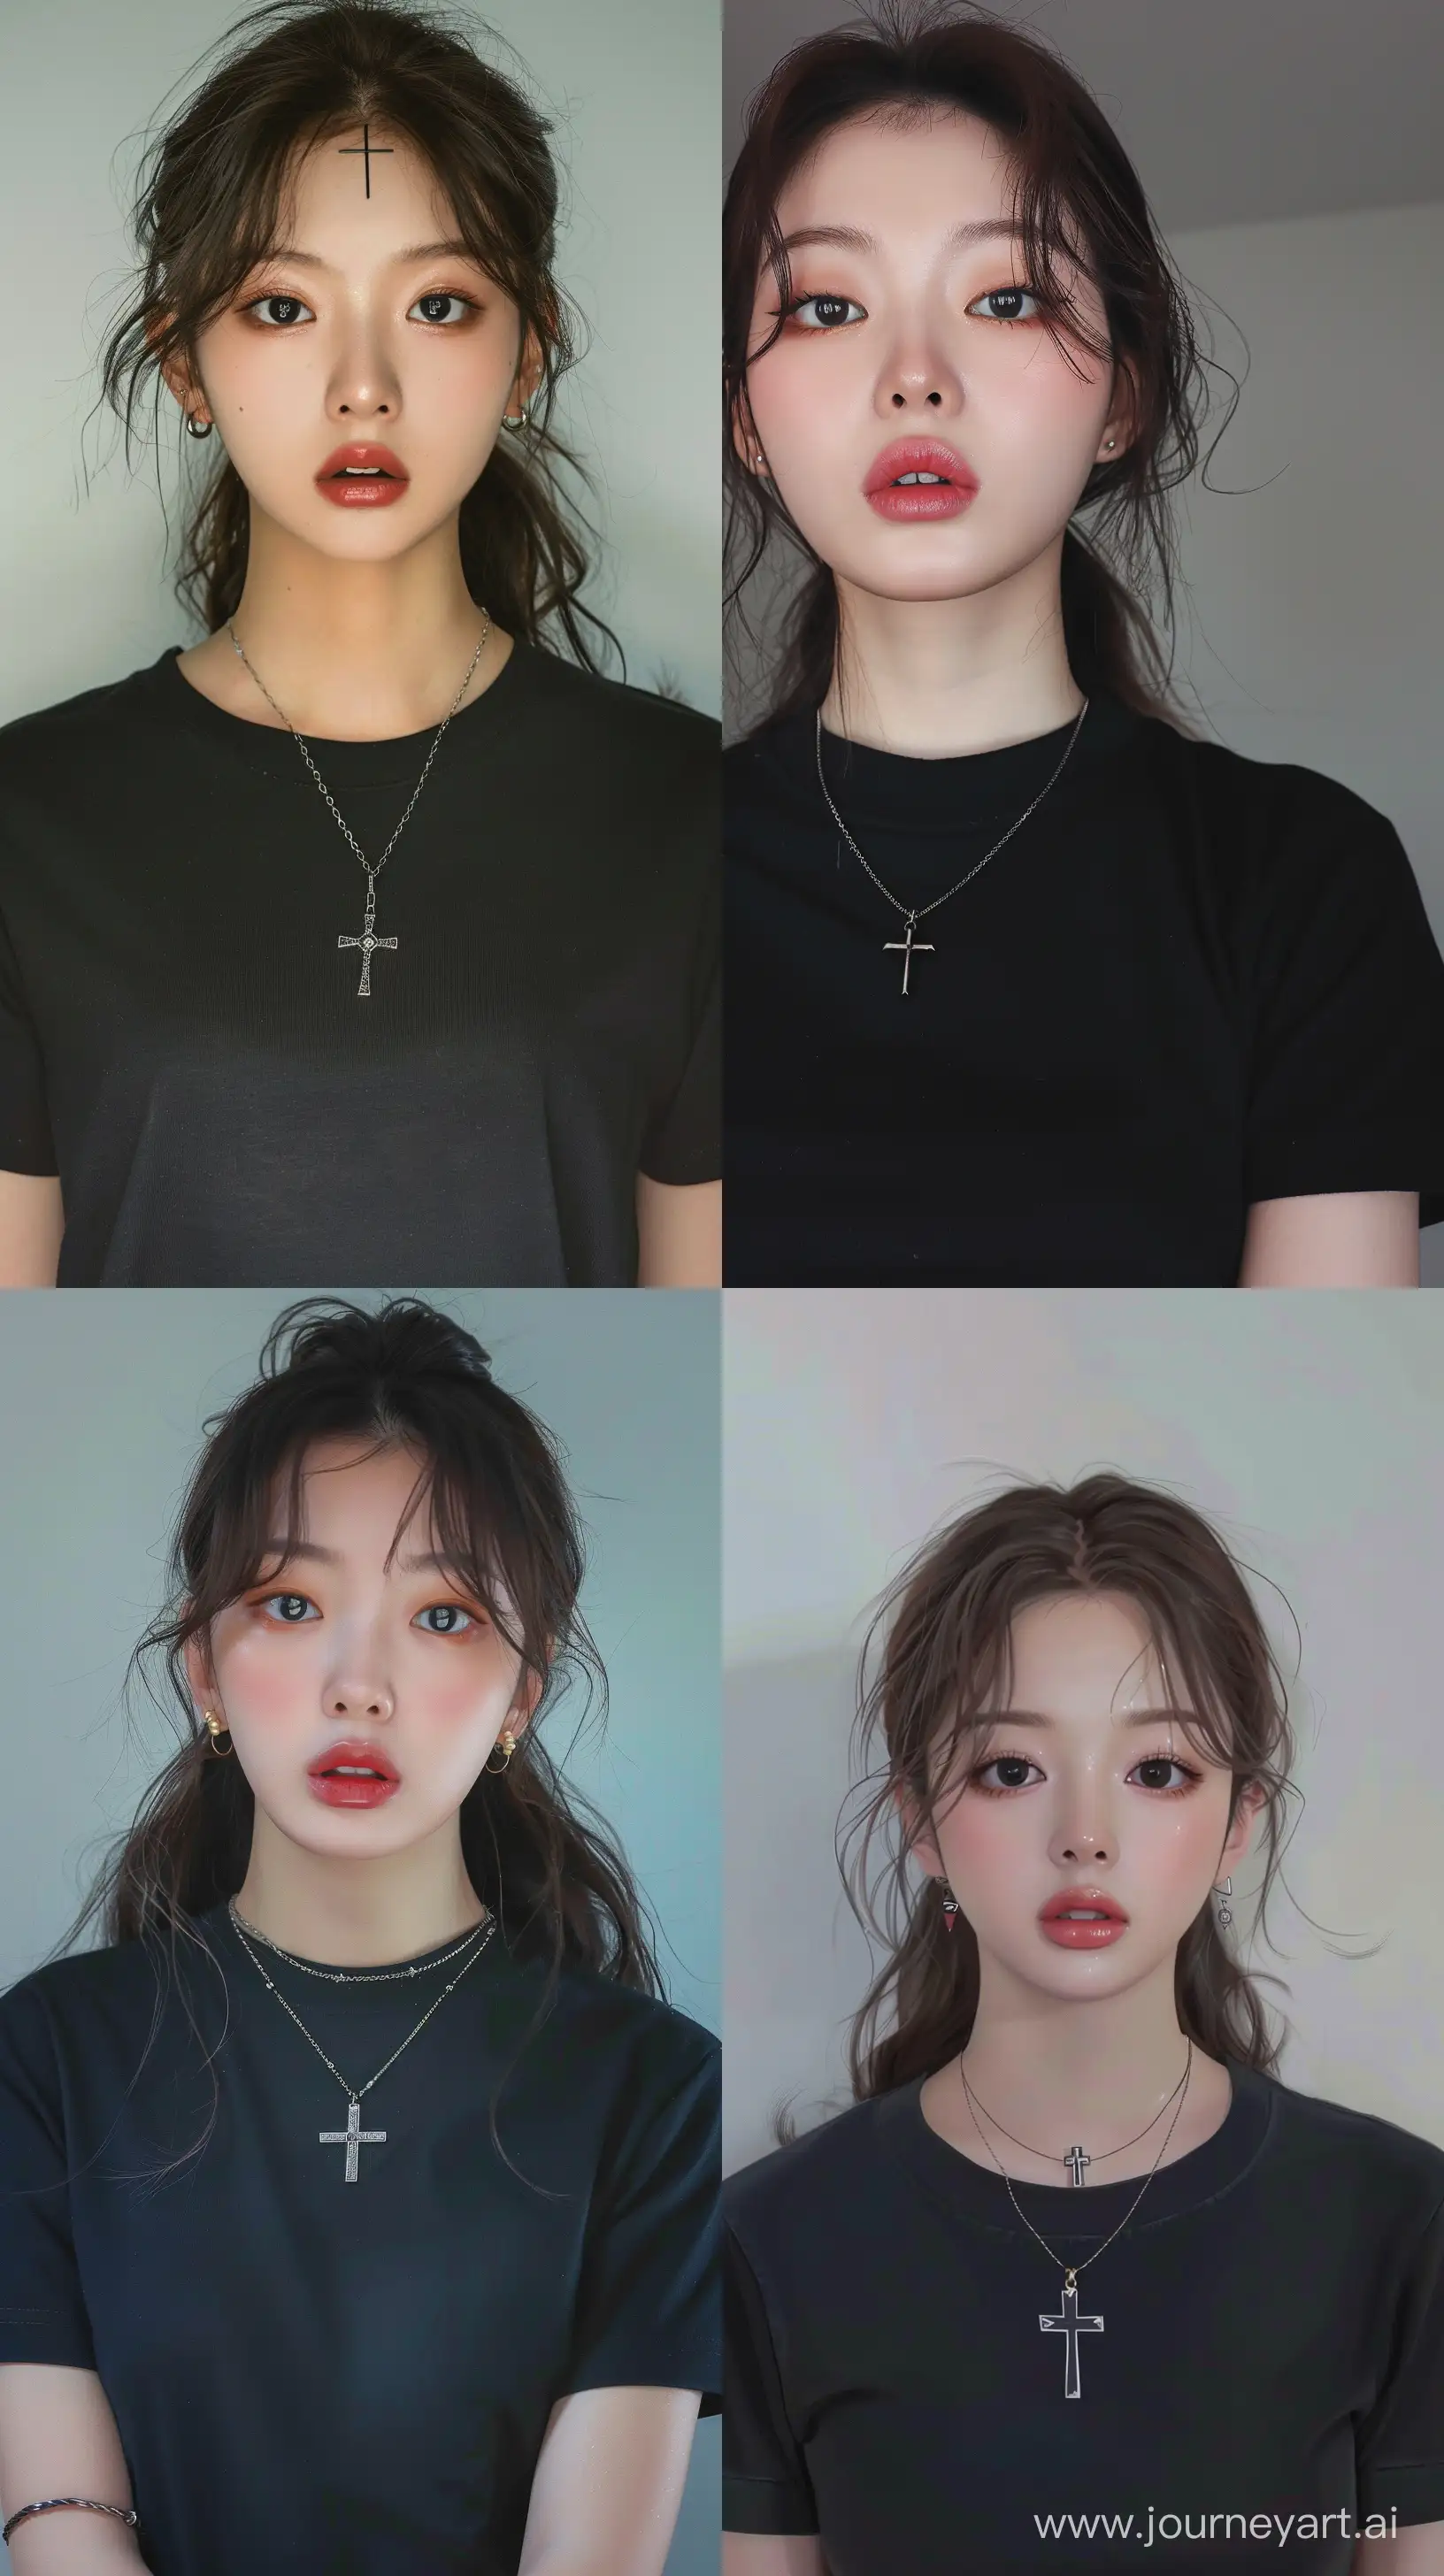 A beautiful Asian woman with wide-set eyes,wearing black tshirt and cross necklace a youthful appearance, and facial features resembling Blackpink's Jennie. --ar 9:16 --v 6